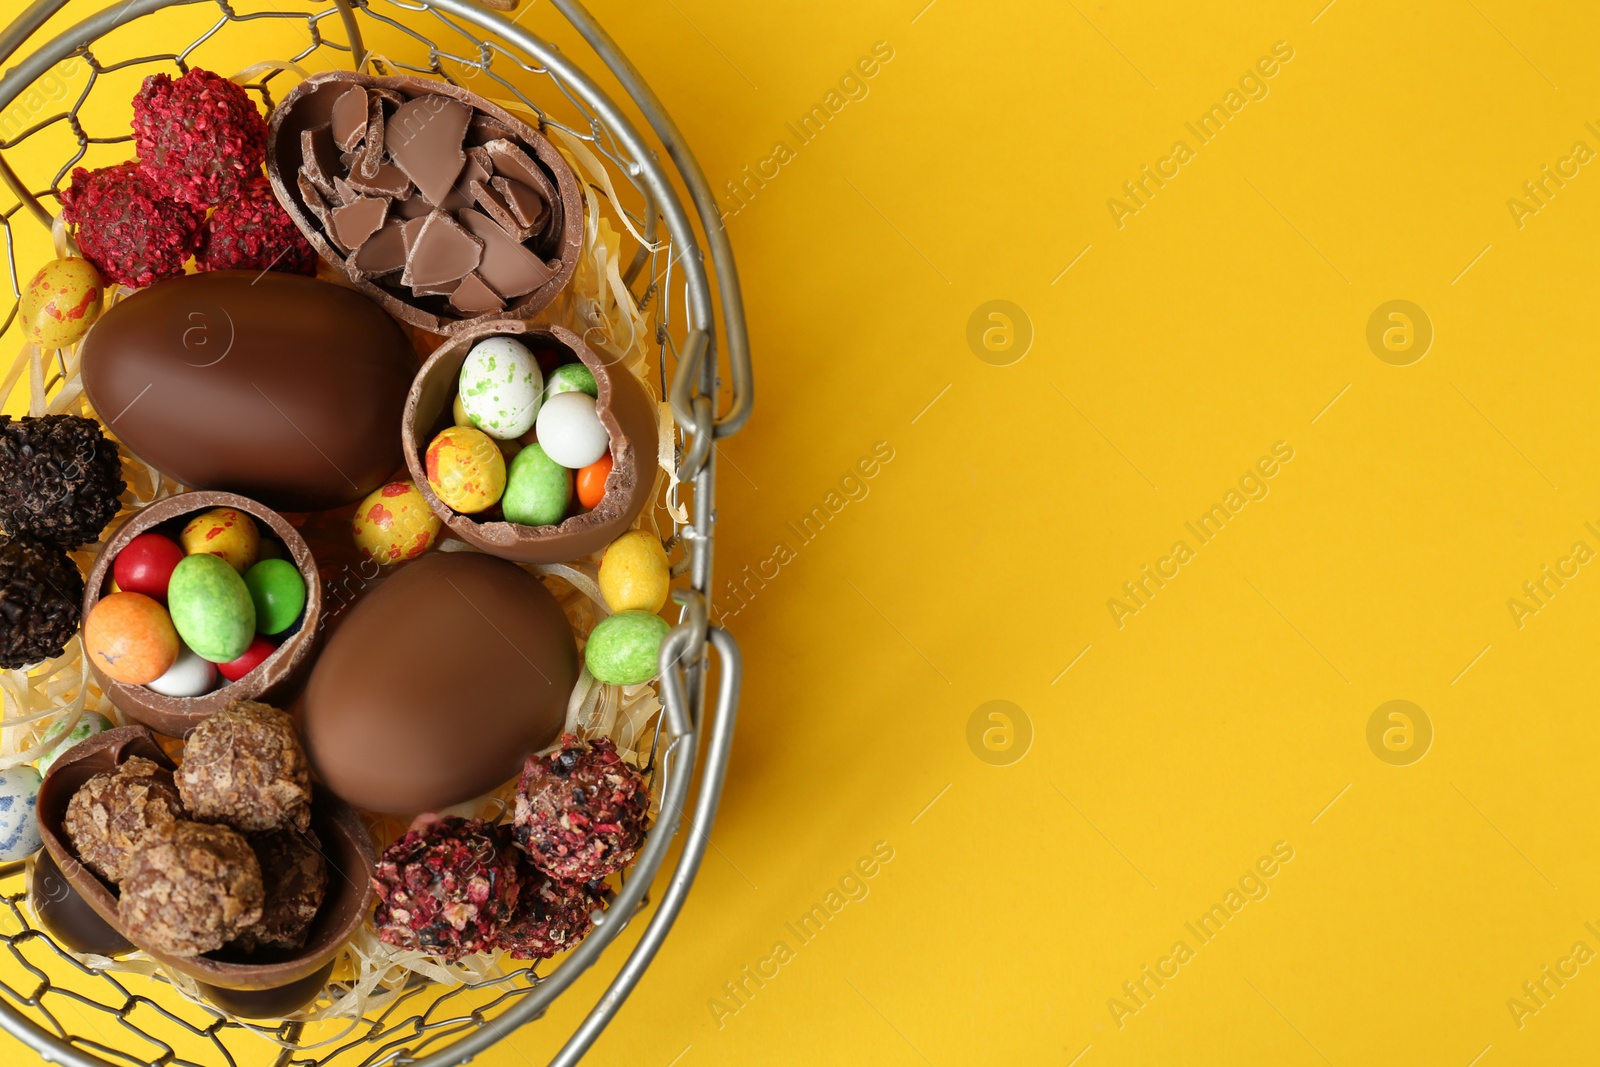 Photo of Basket with chocolate eggs and candies on yellow background, top view. Space for text